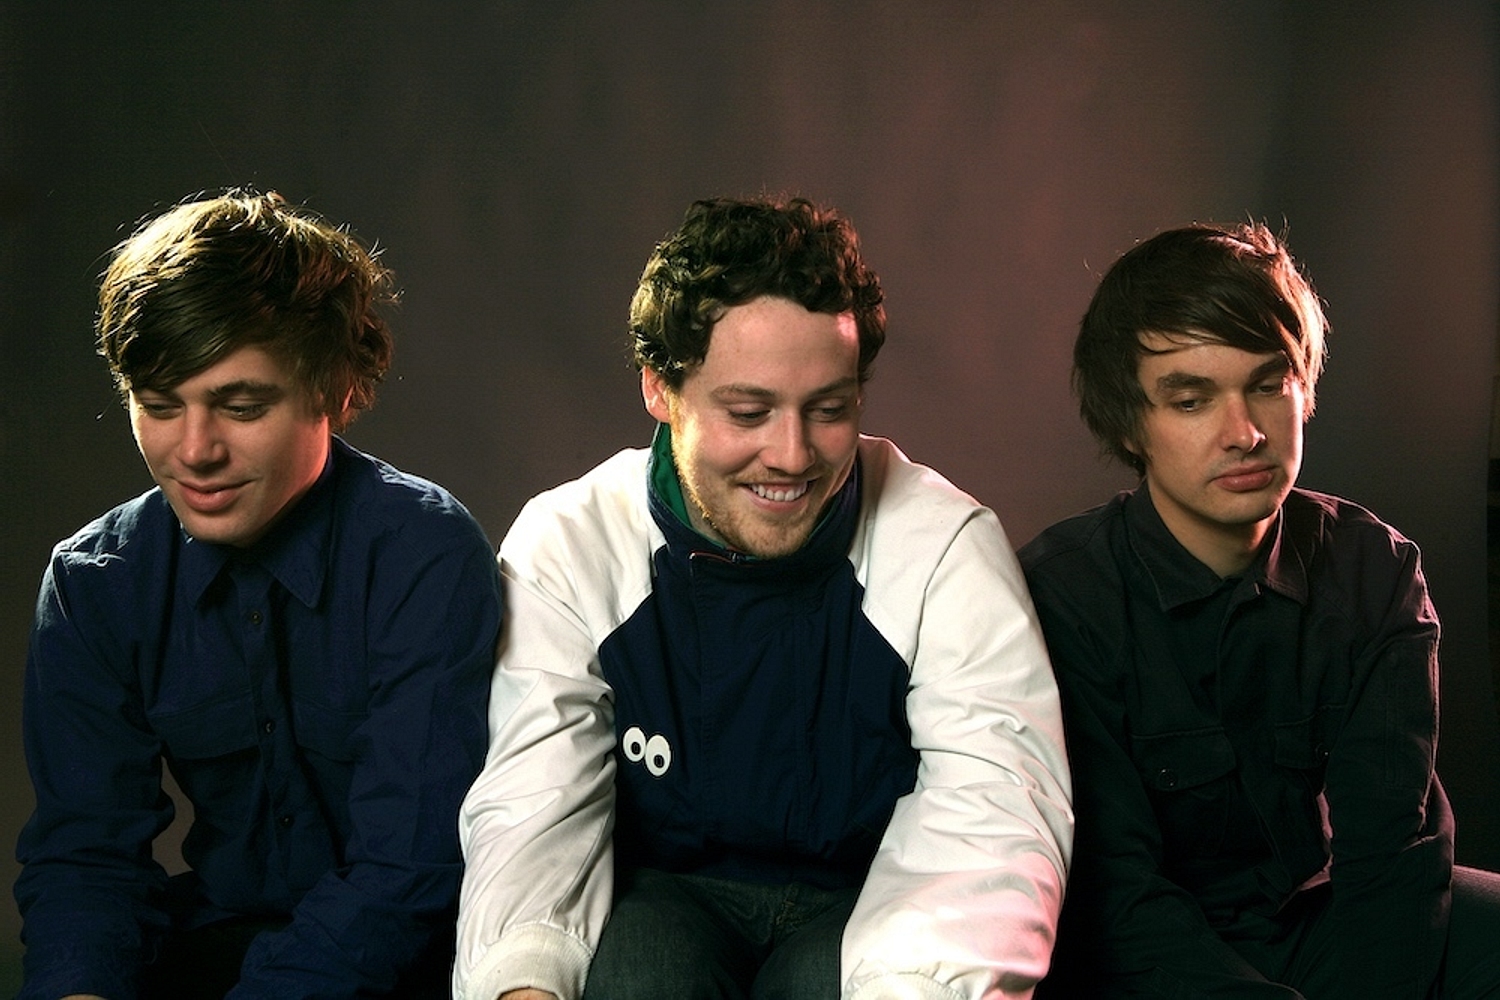 Metronomy are re-releasing their ‘Nights Out’ album for its tenth anniversary